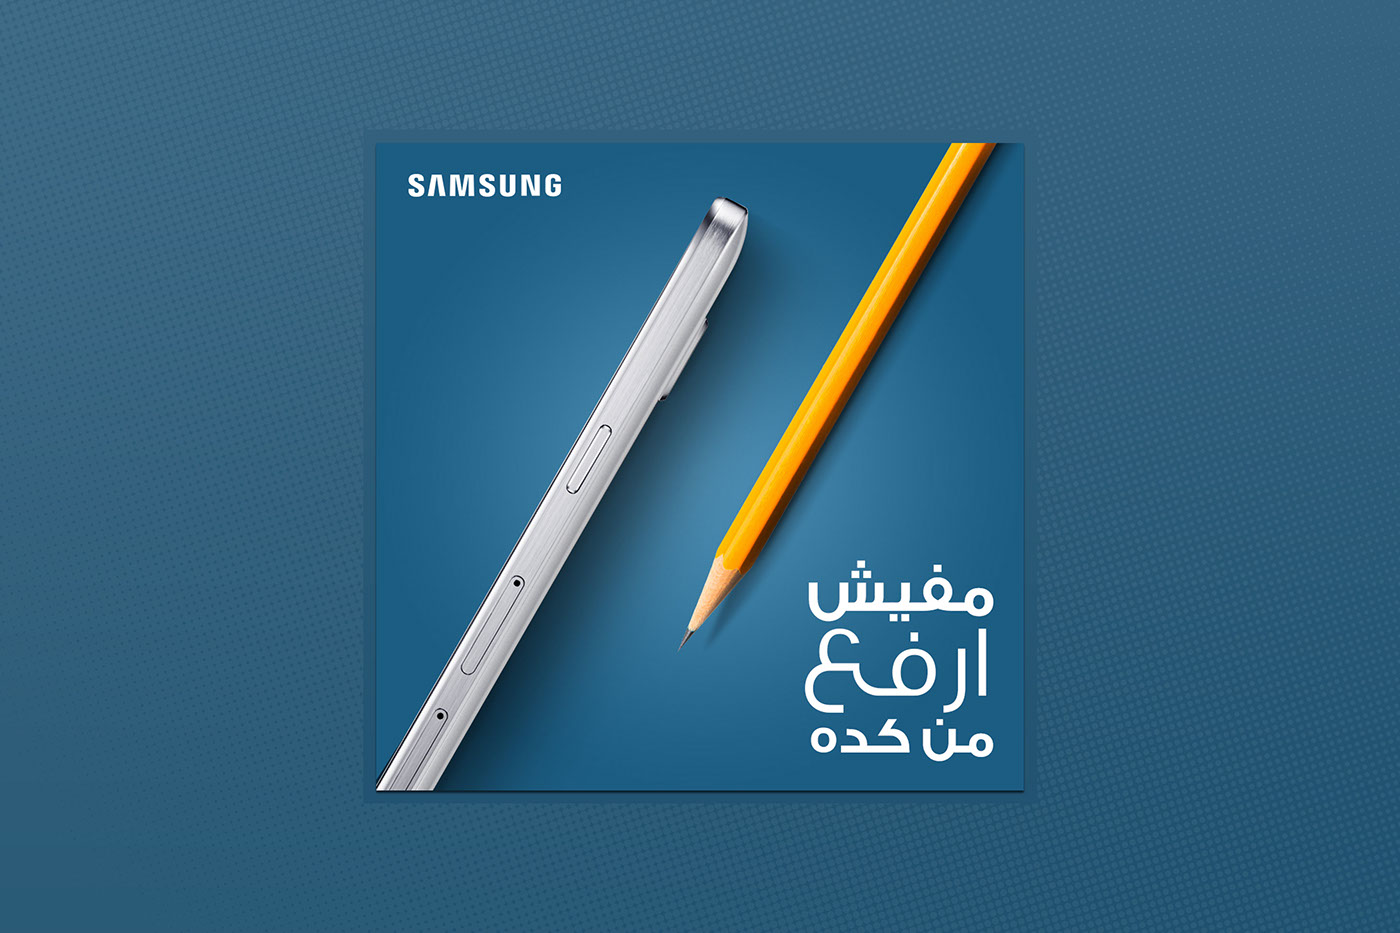 Samsung social media facebook mobiles products